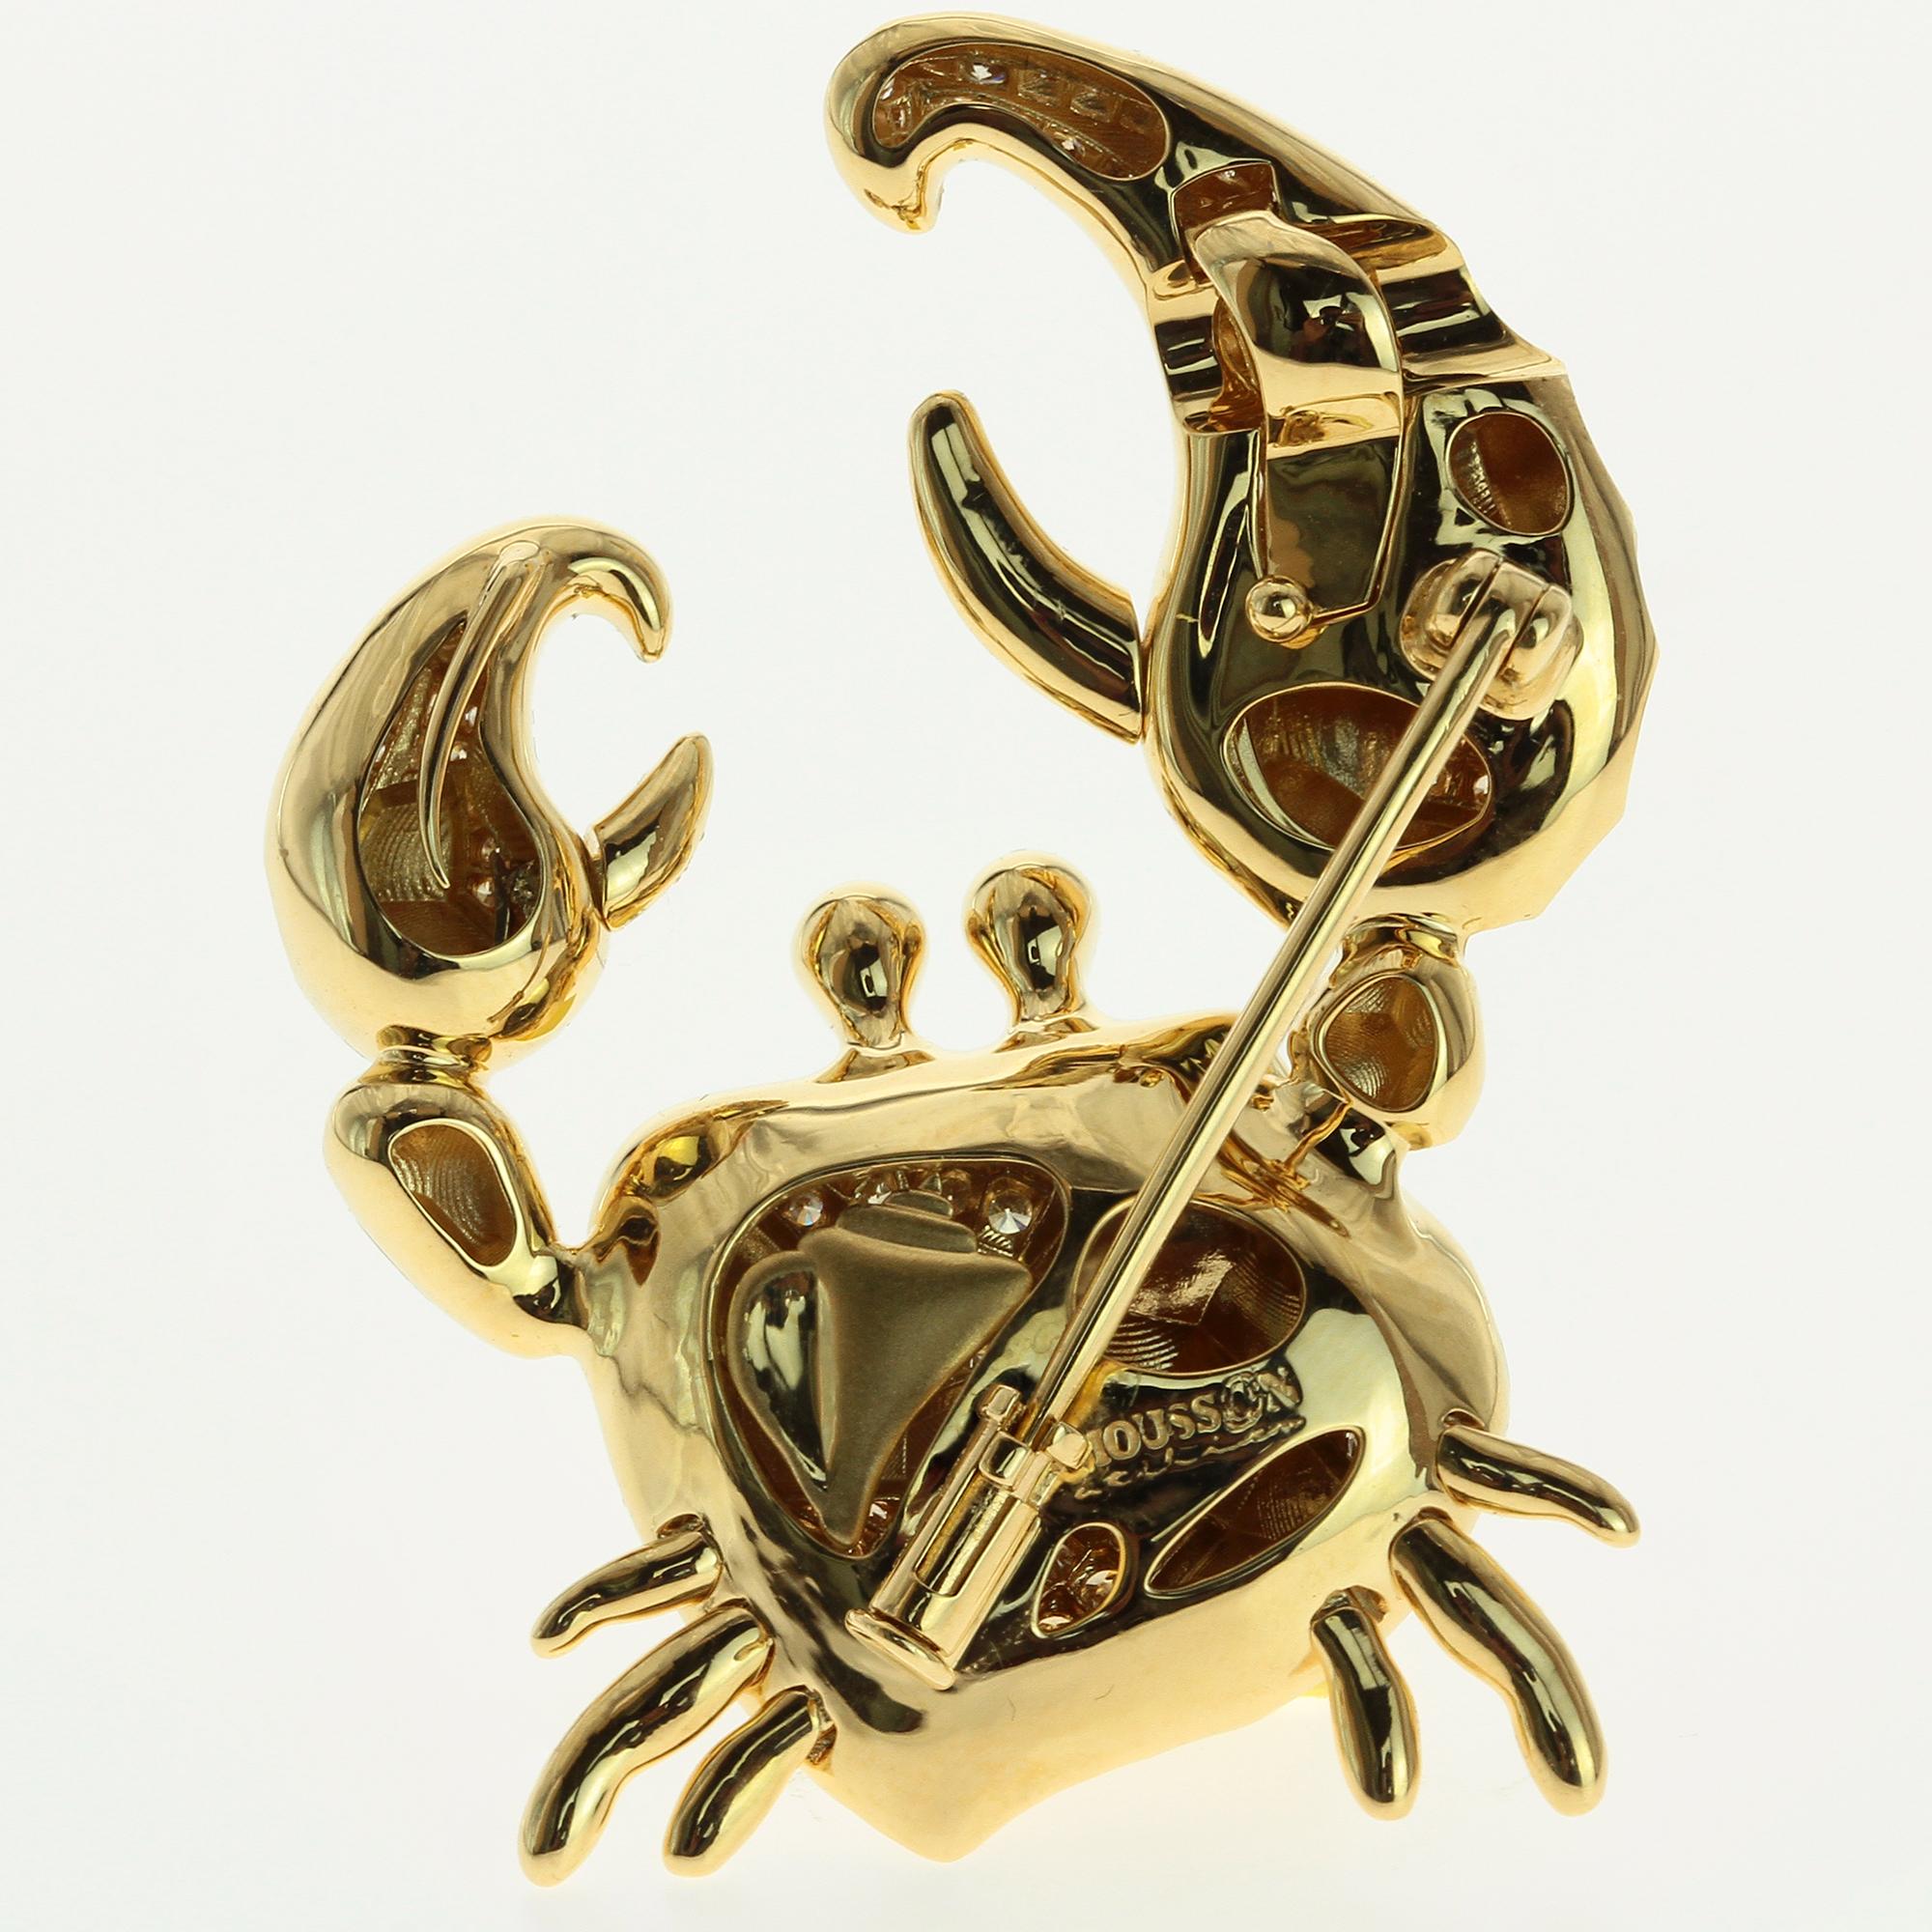 Champagne Diamonds Tourmaline 18 Karat Yellow Gold Crab Brooch
This brooch also can be wear as a pendant. Some fingers are movable, high detailing back side.

47mm x 35mm x 10mm
15.28 gms